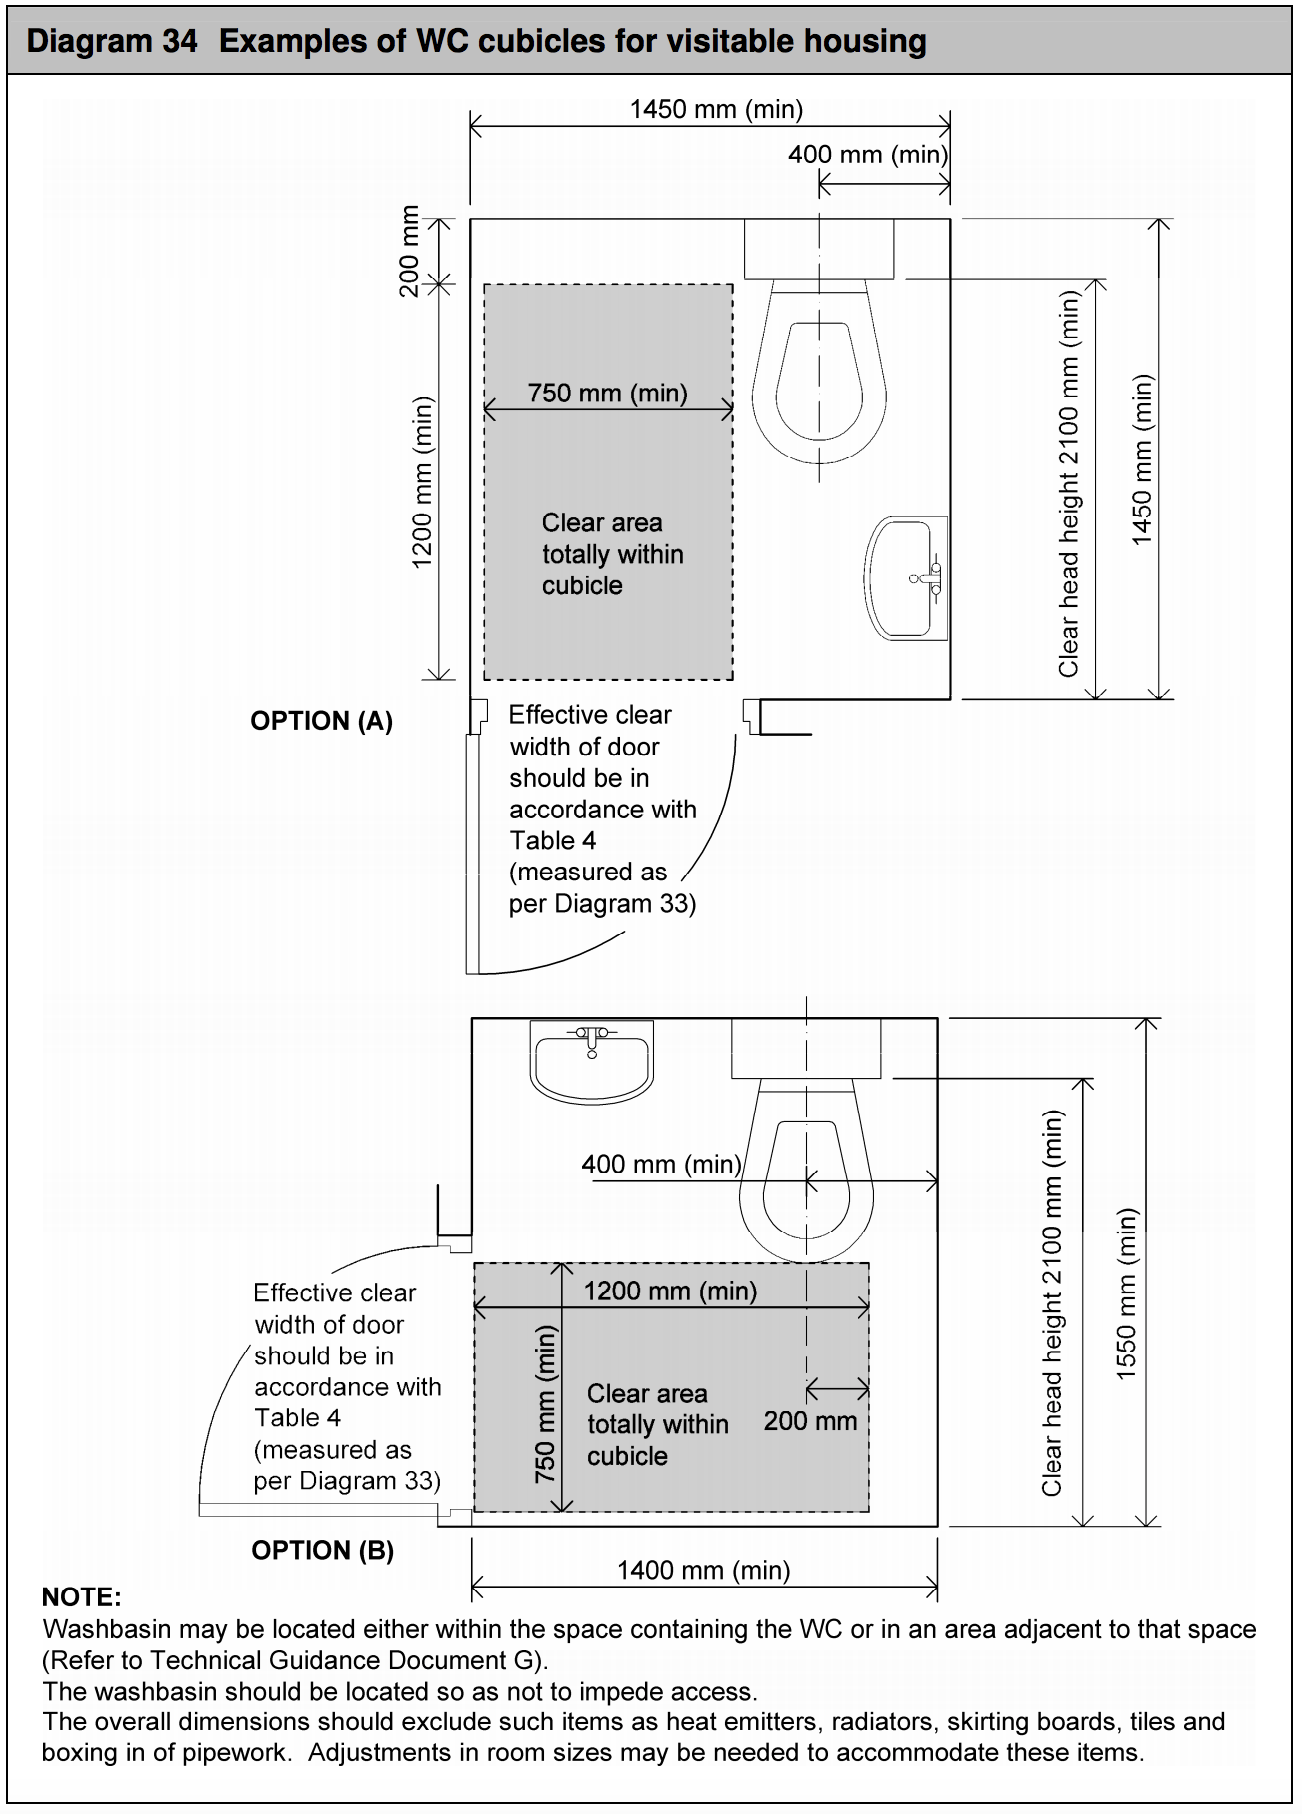 Diagram HM3 - Examples of WC cubicles for visitable housing- Extract from TGD M